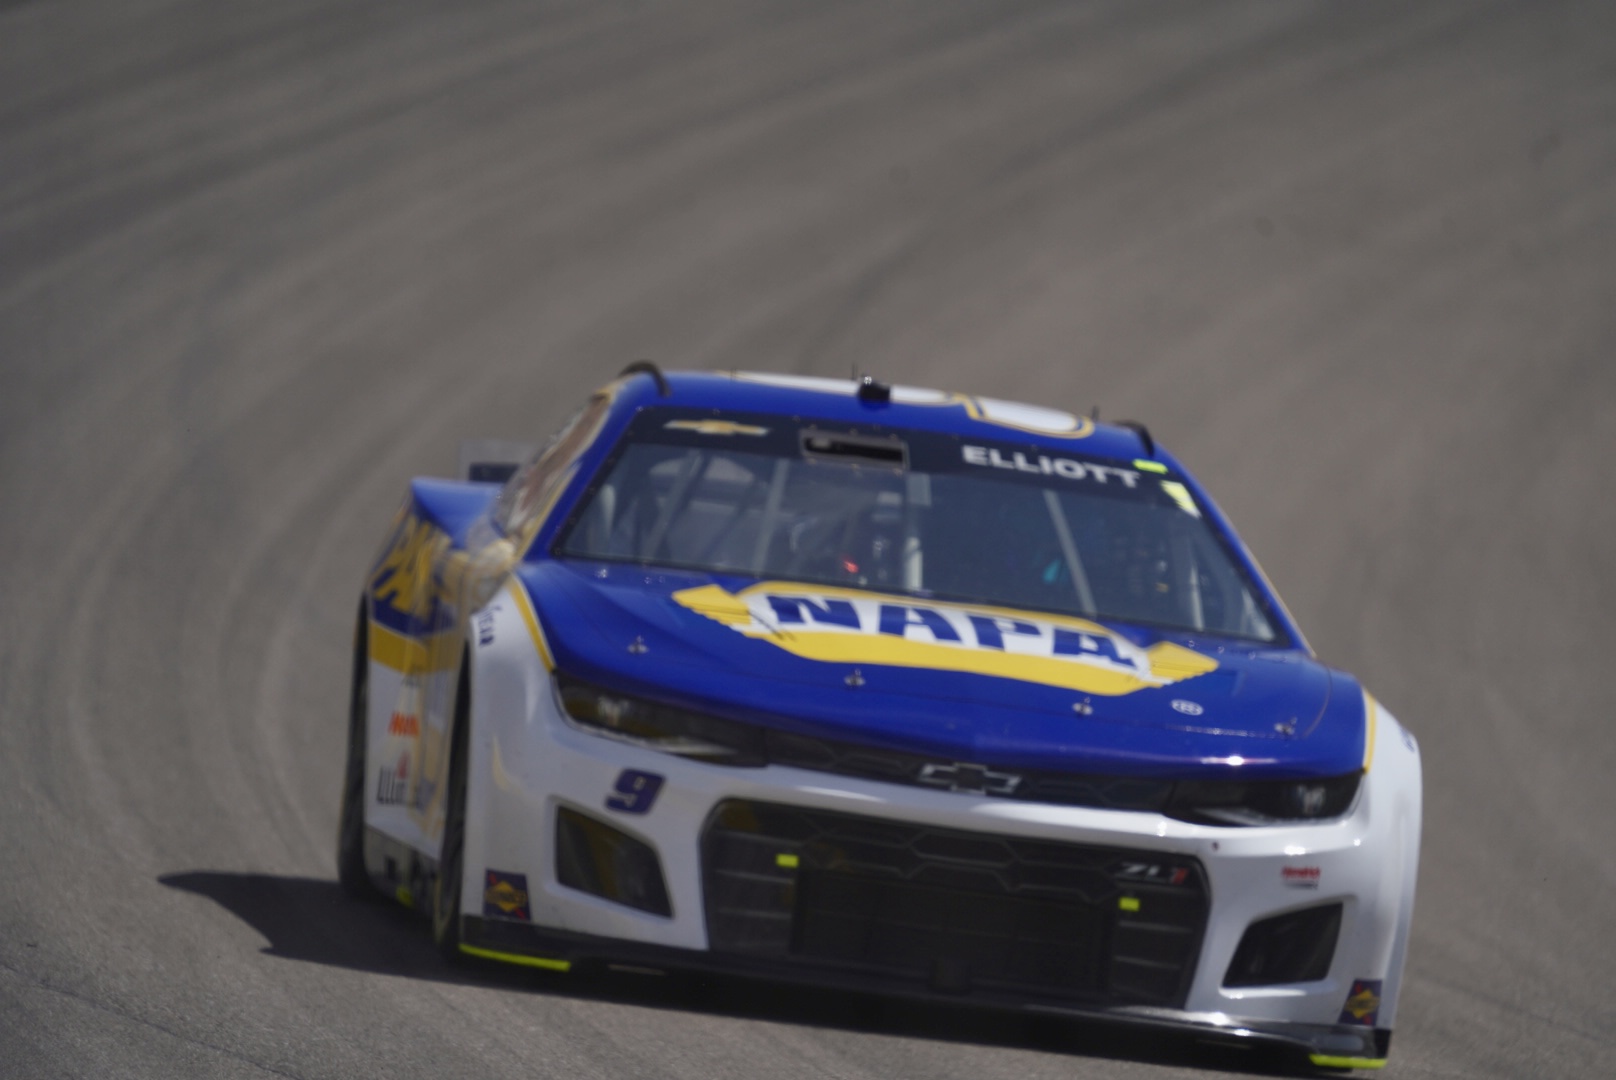 Despite adjusting to the new Next Gen car, Elliott seems confident about his chances as the year progresses. (Photo: Jordan Anders-McClain | The Podium Finish)